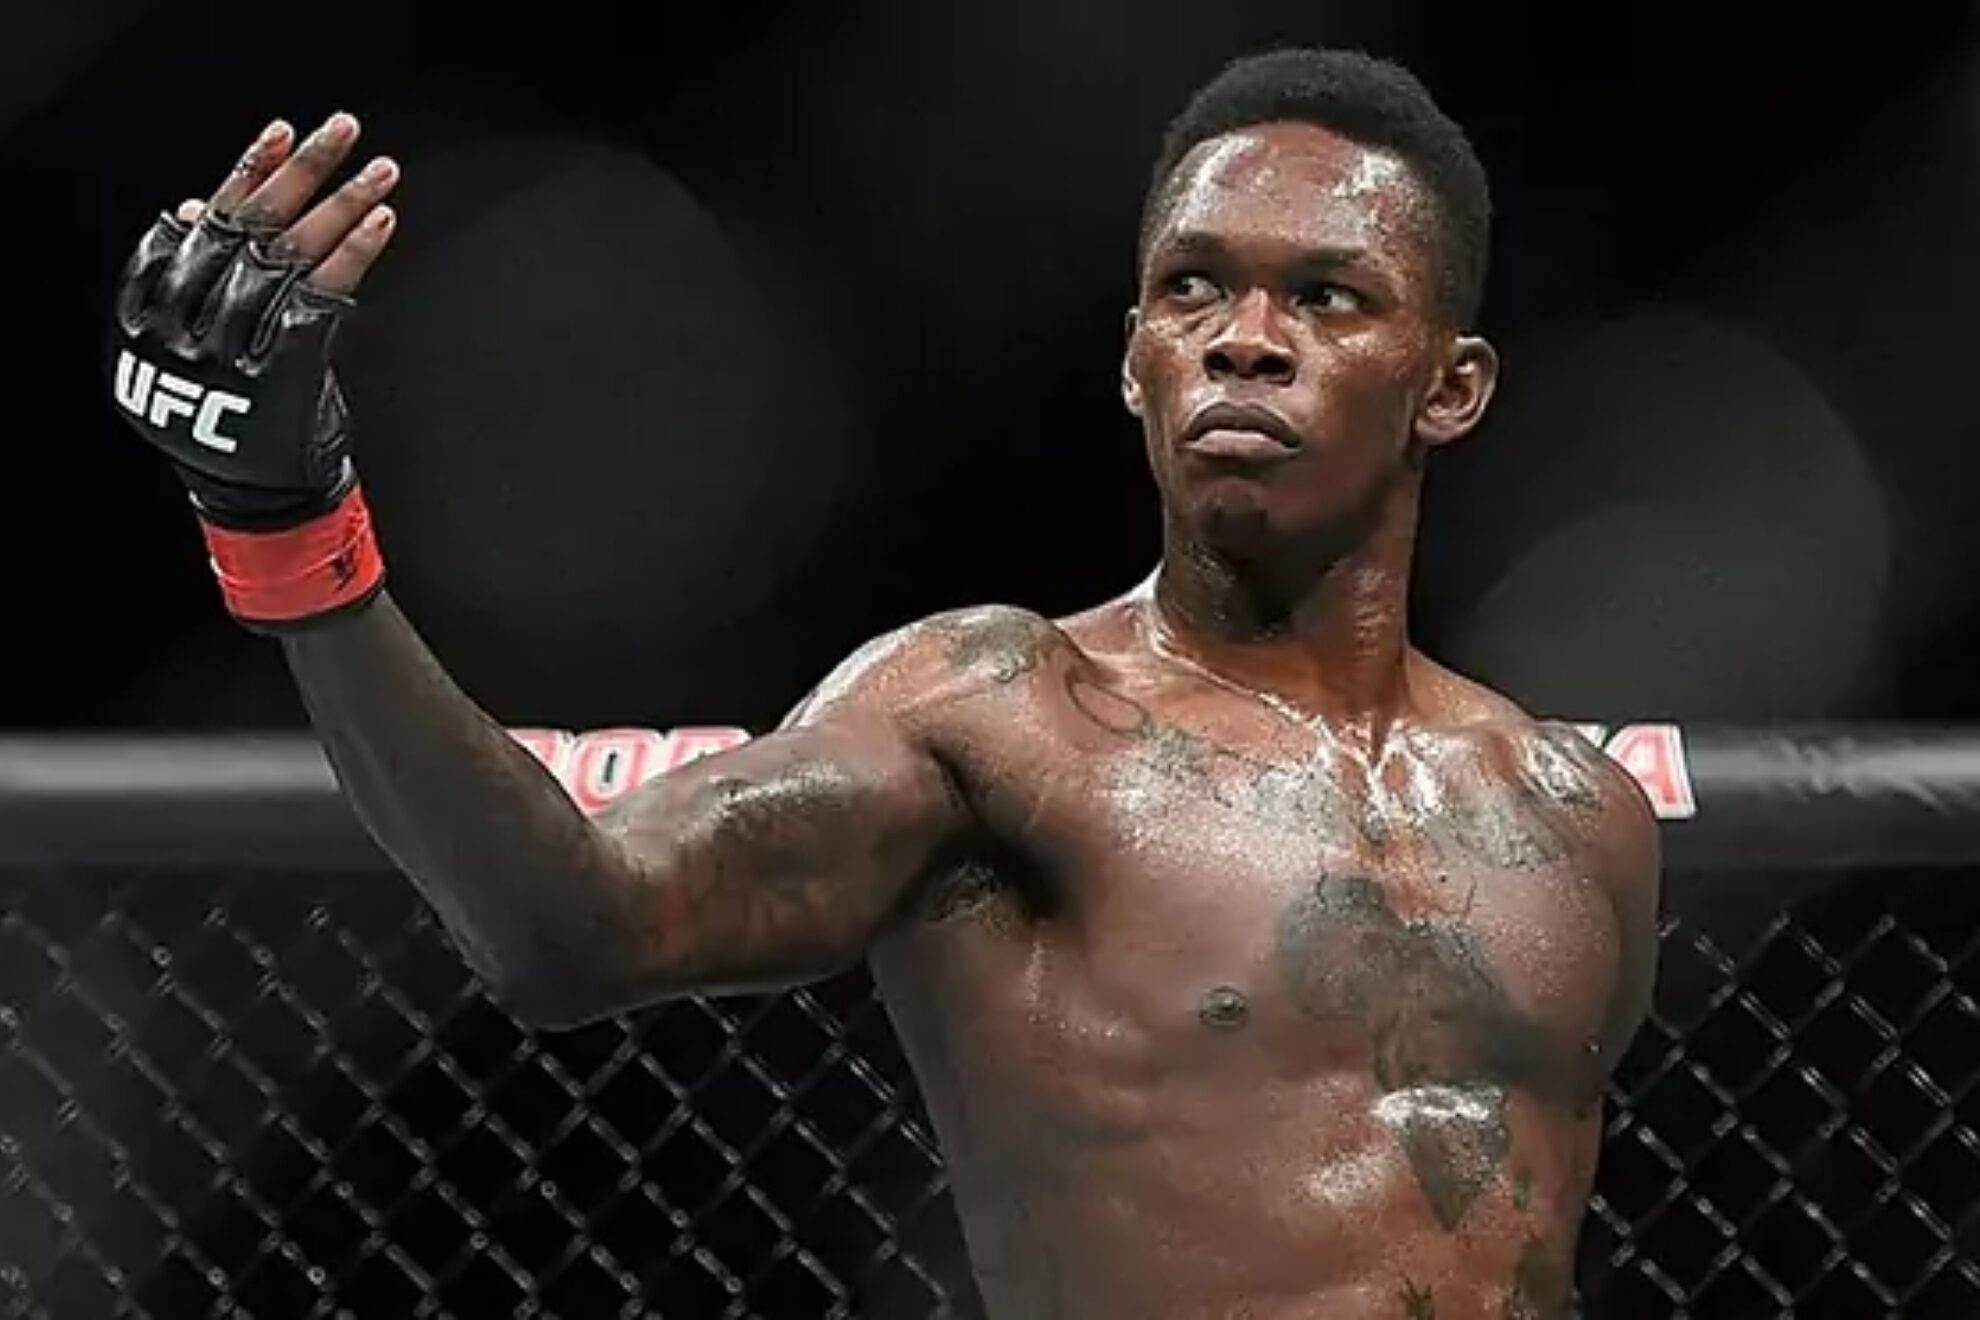 How Israel Adesanya Must Go Down to Get Back Up